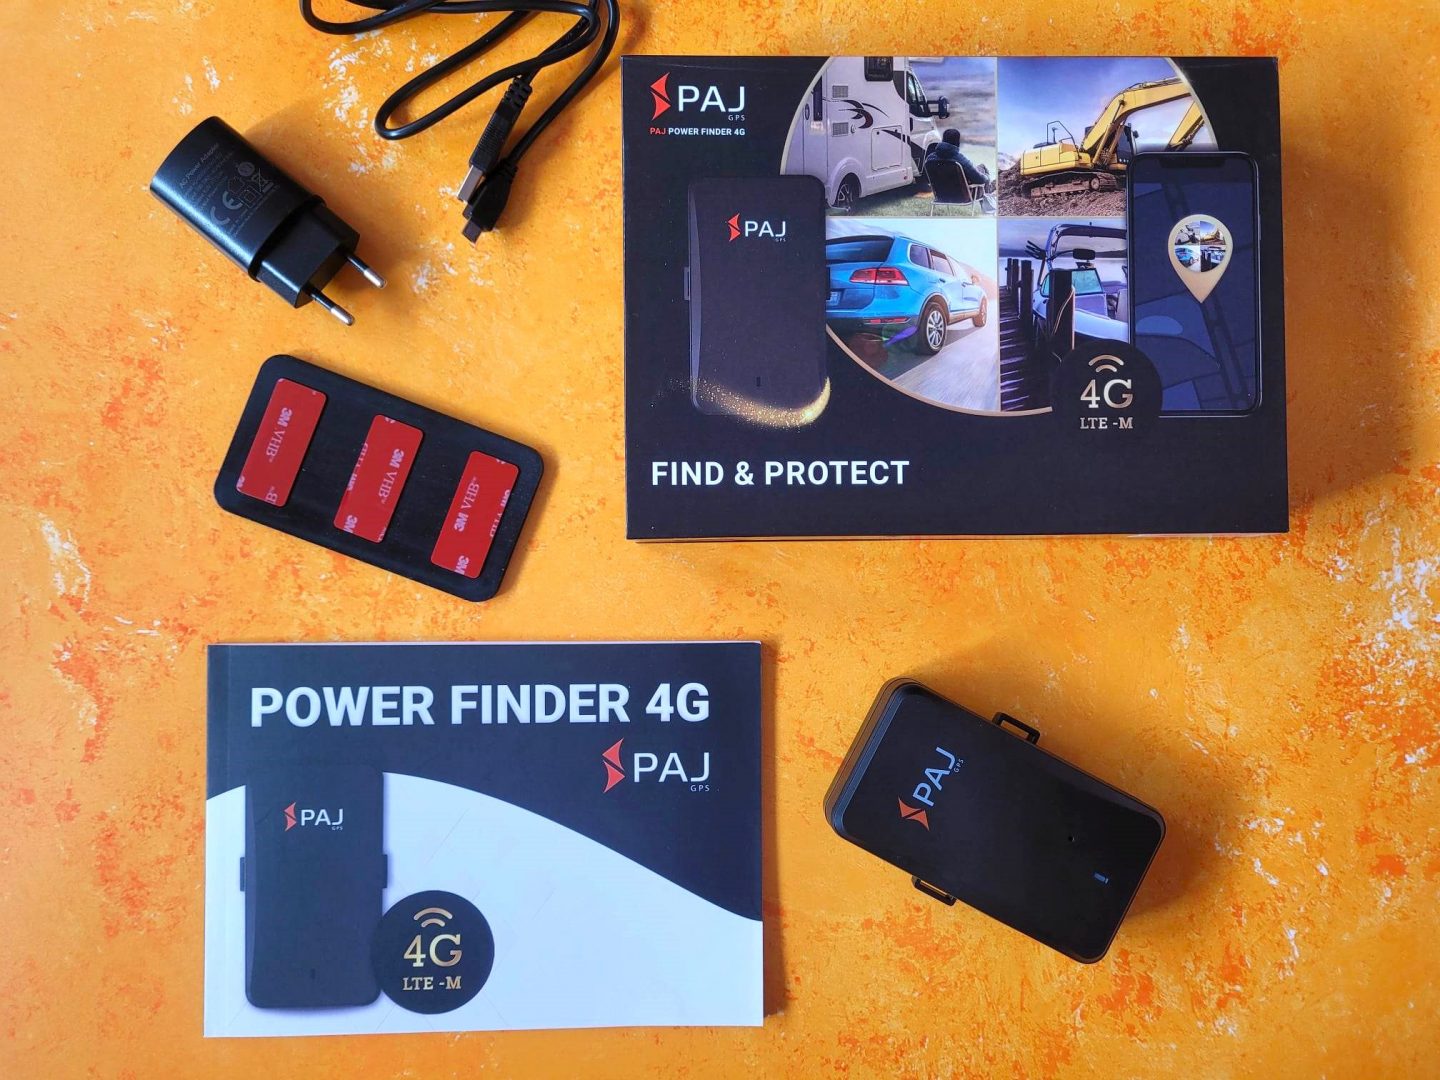 PAJ GPS Power Finder 4G review